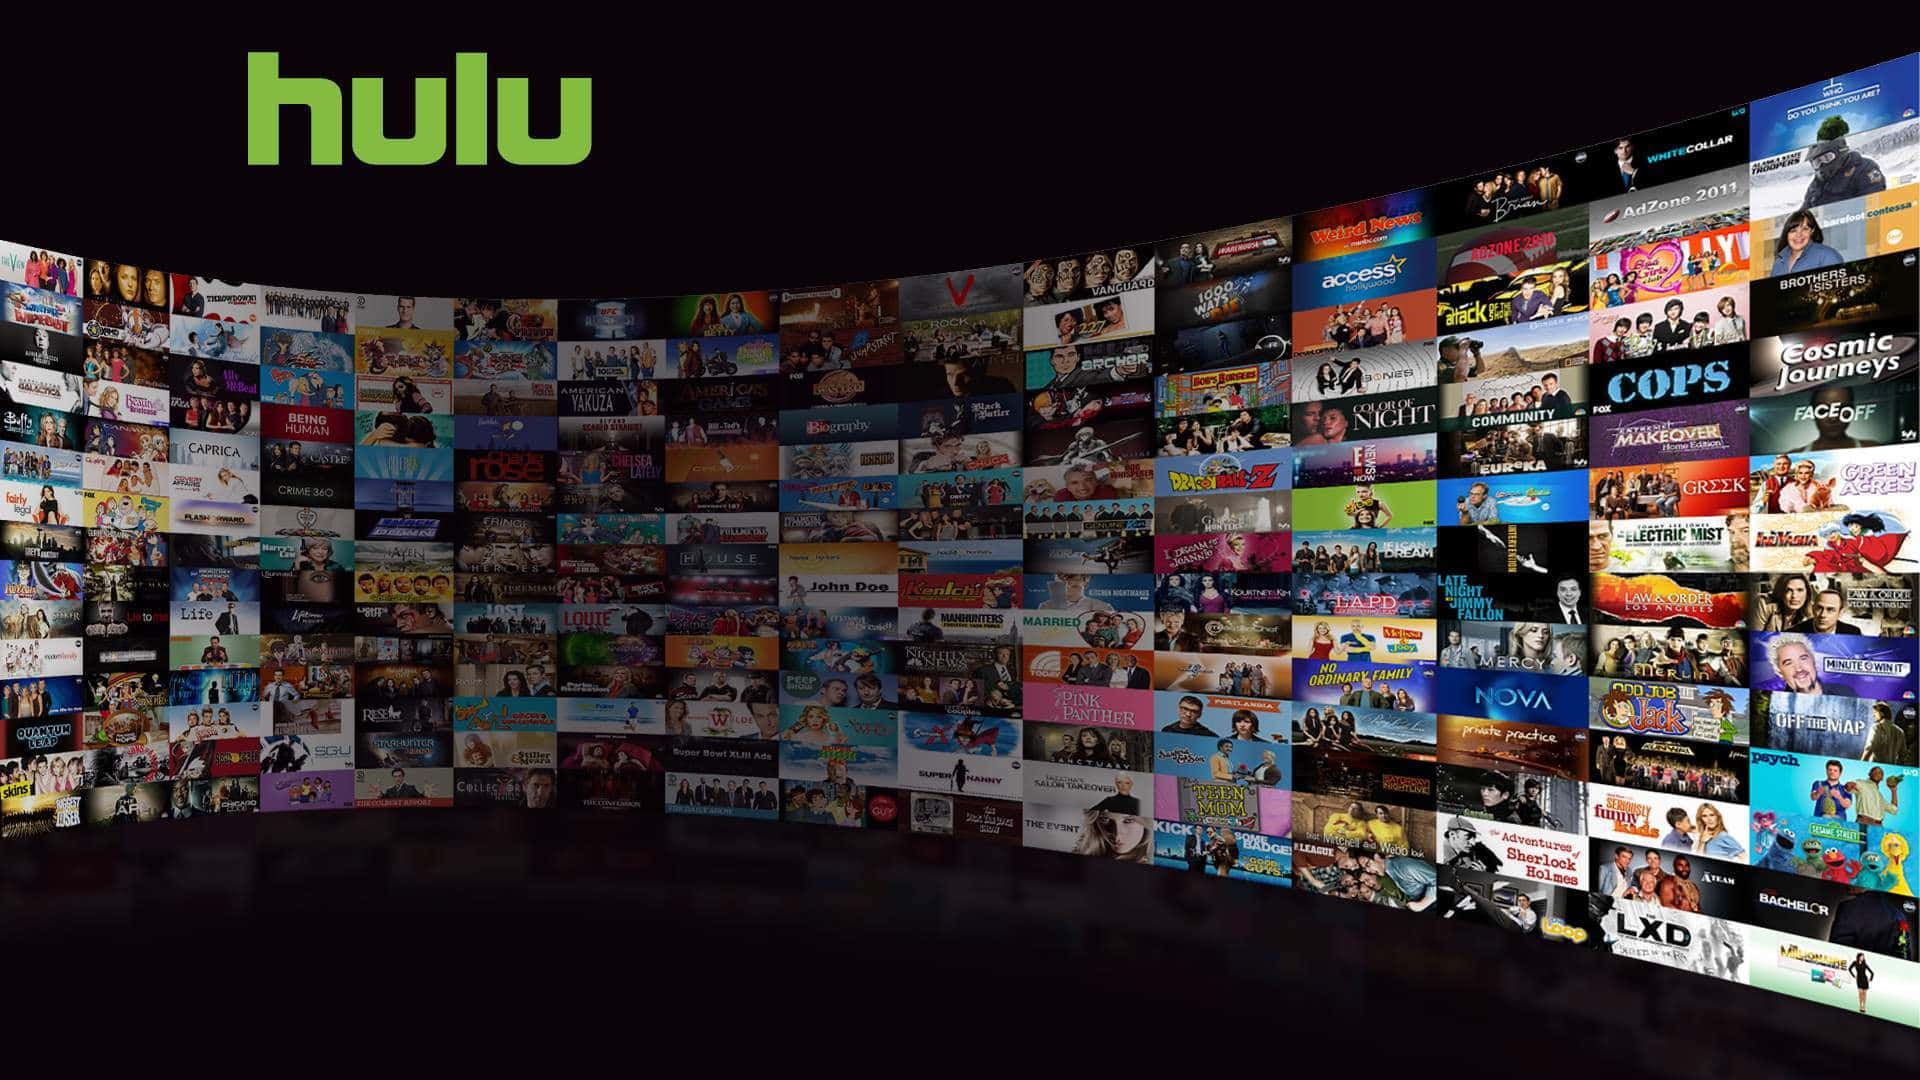 Stream the best shows and movies on Hulu